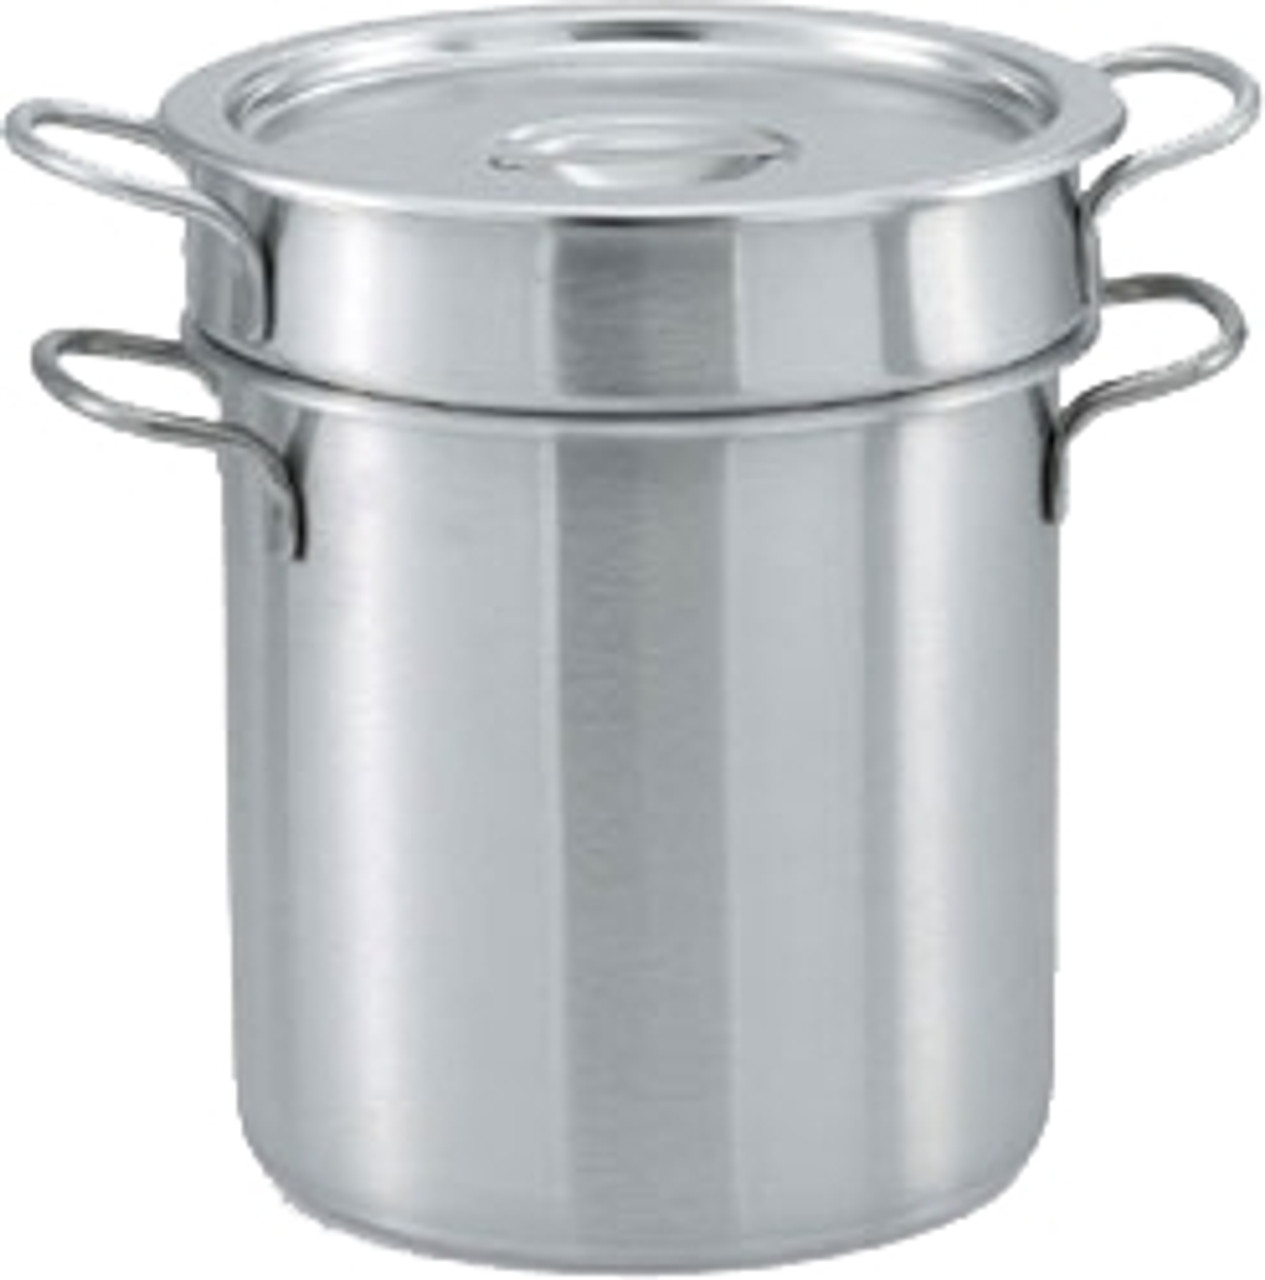 Vollrath 77070 Double Boiler - 7 Qt - Stainless Steel